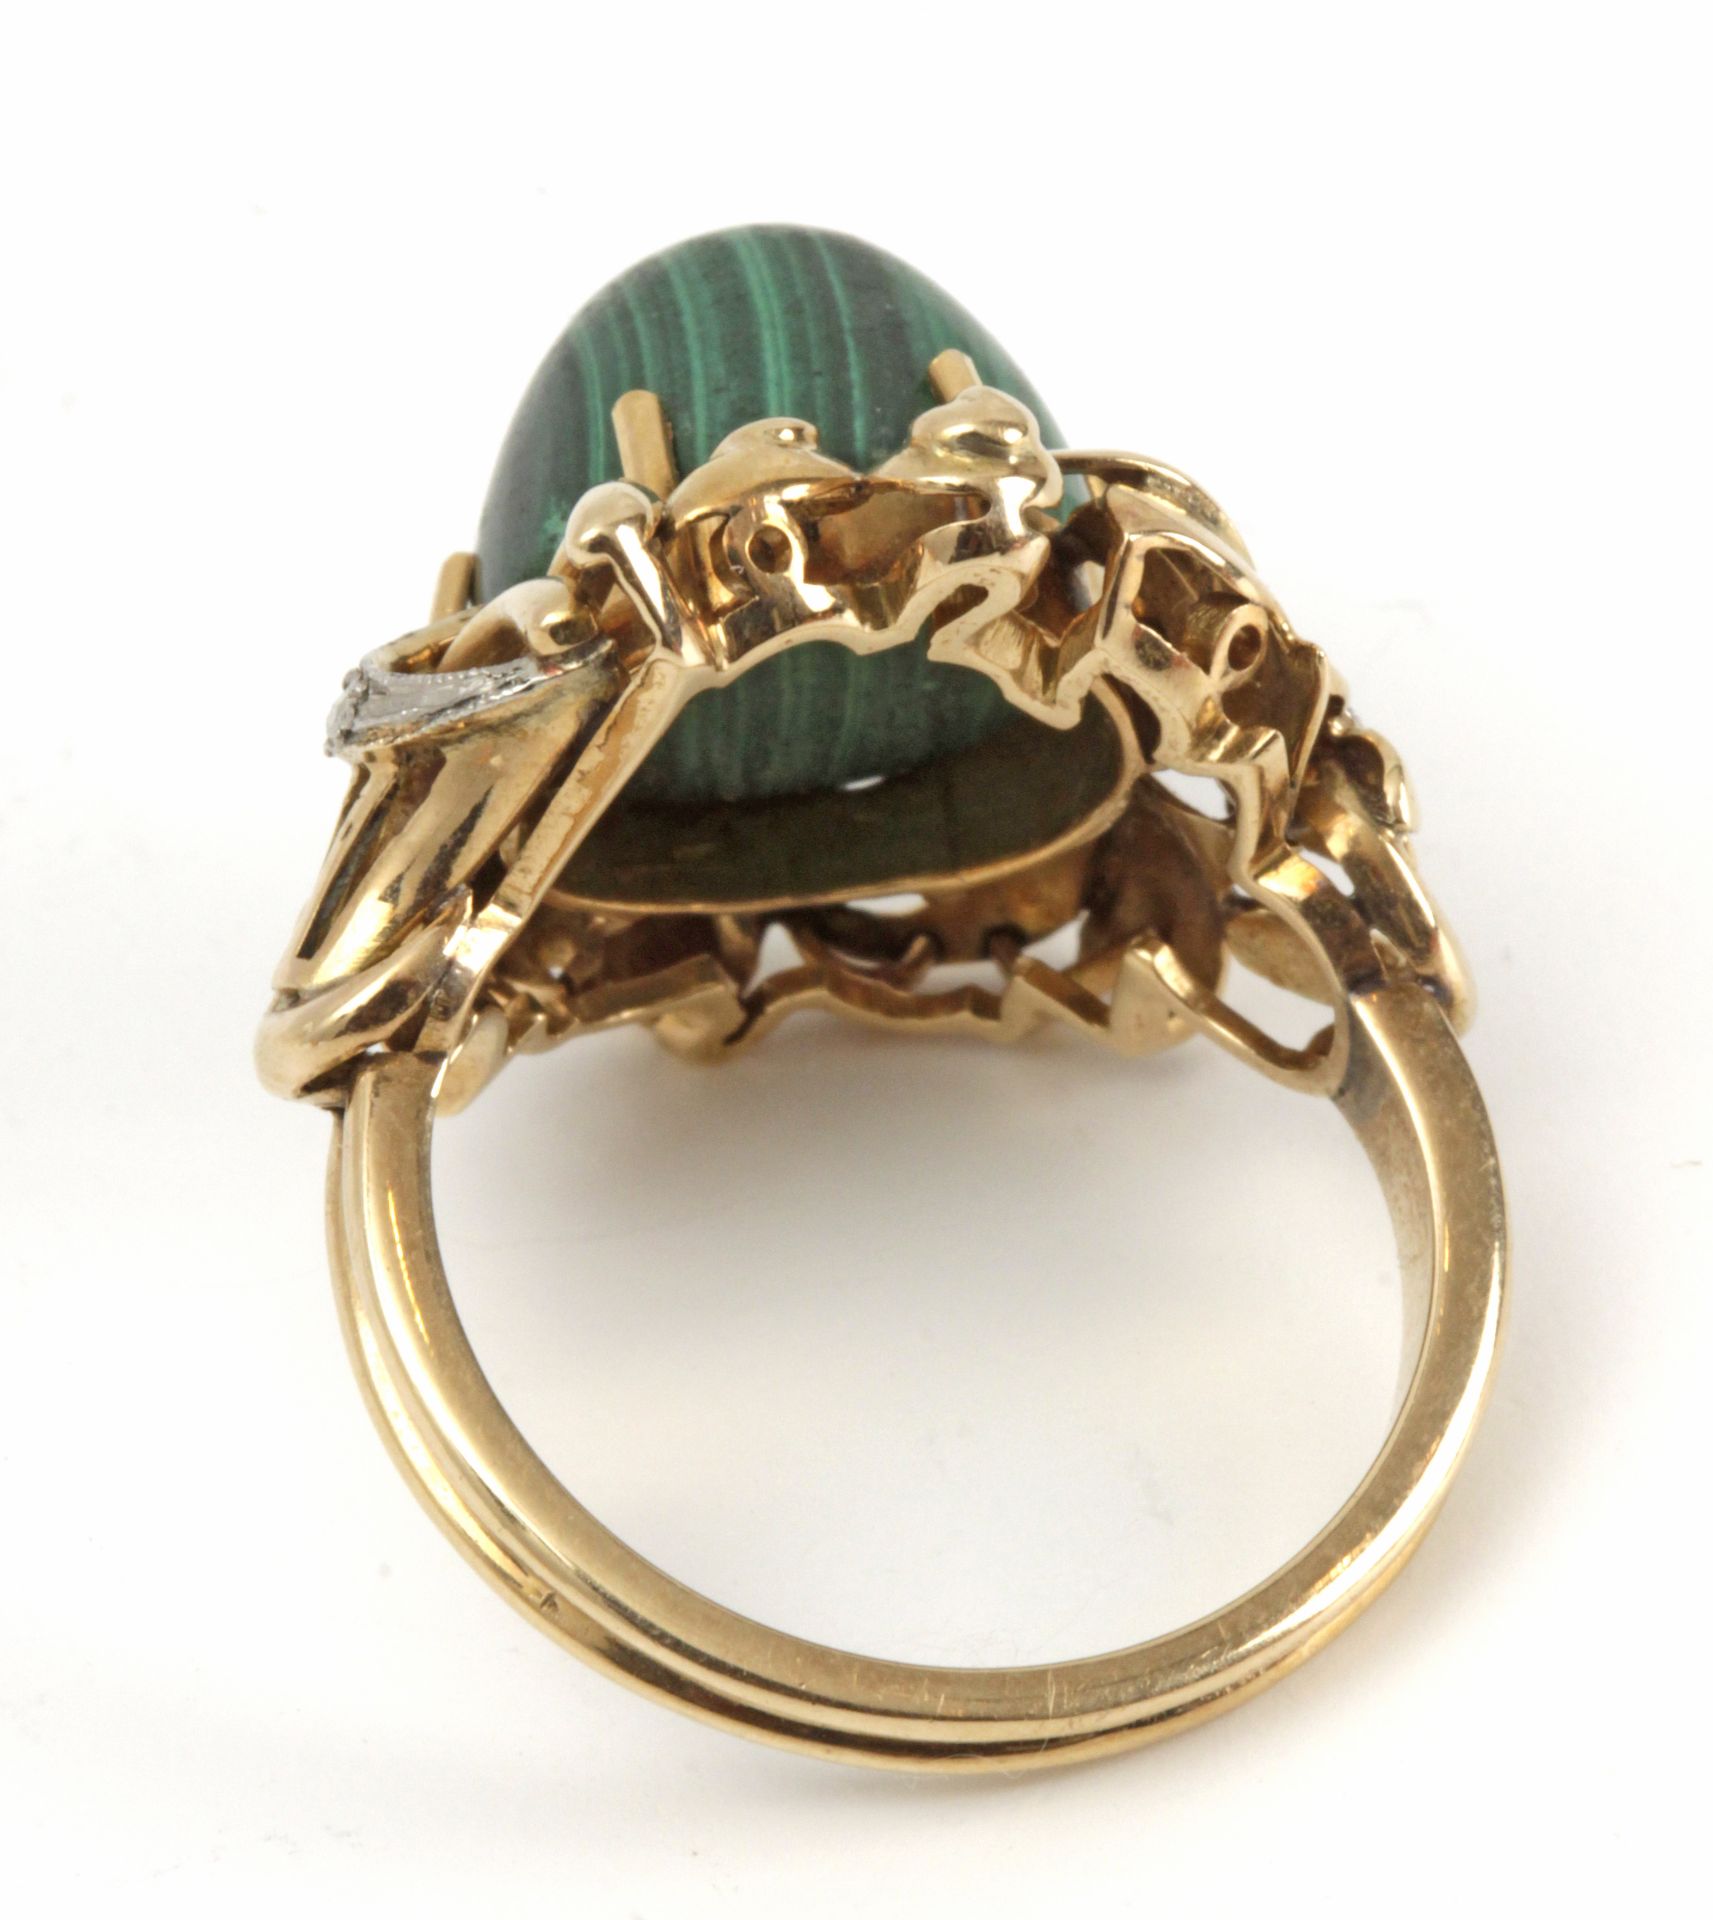 A malachite and diamonds ring circa 1950 with an 18k. yellow gold setting - Image 3 of 3